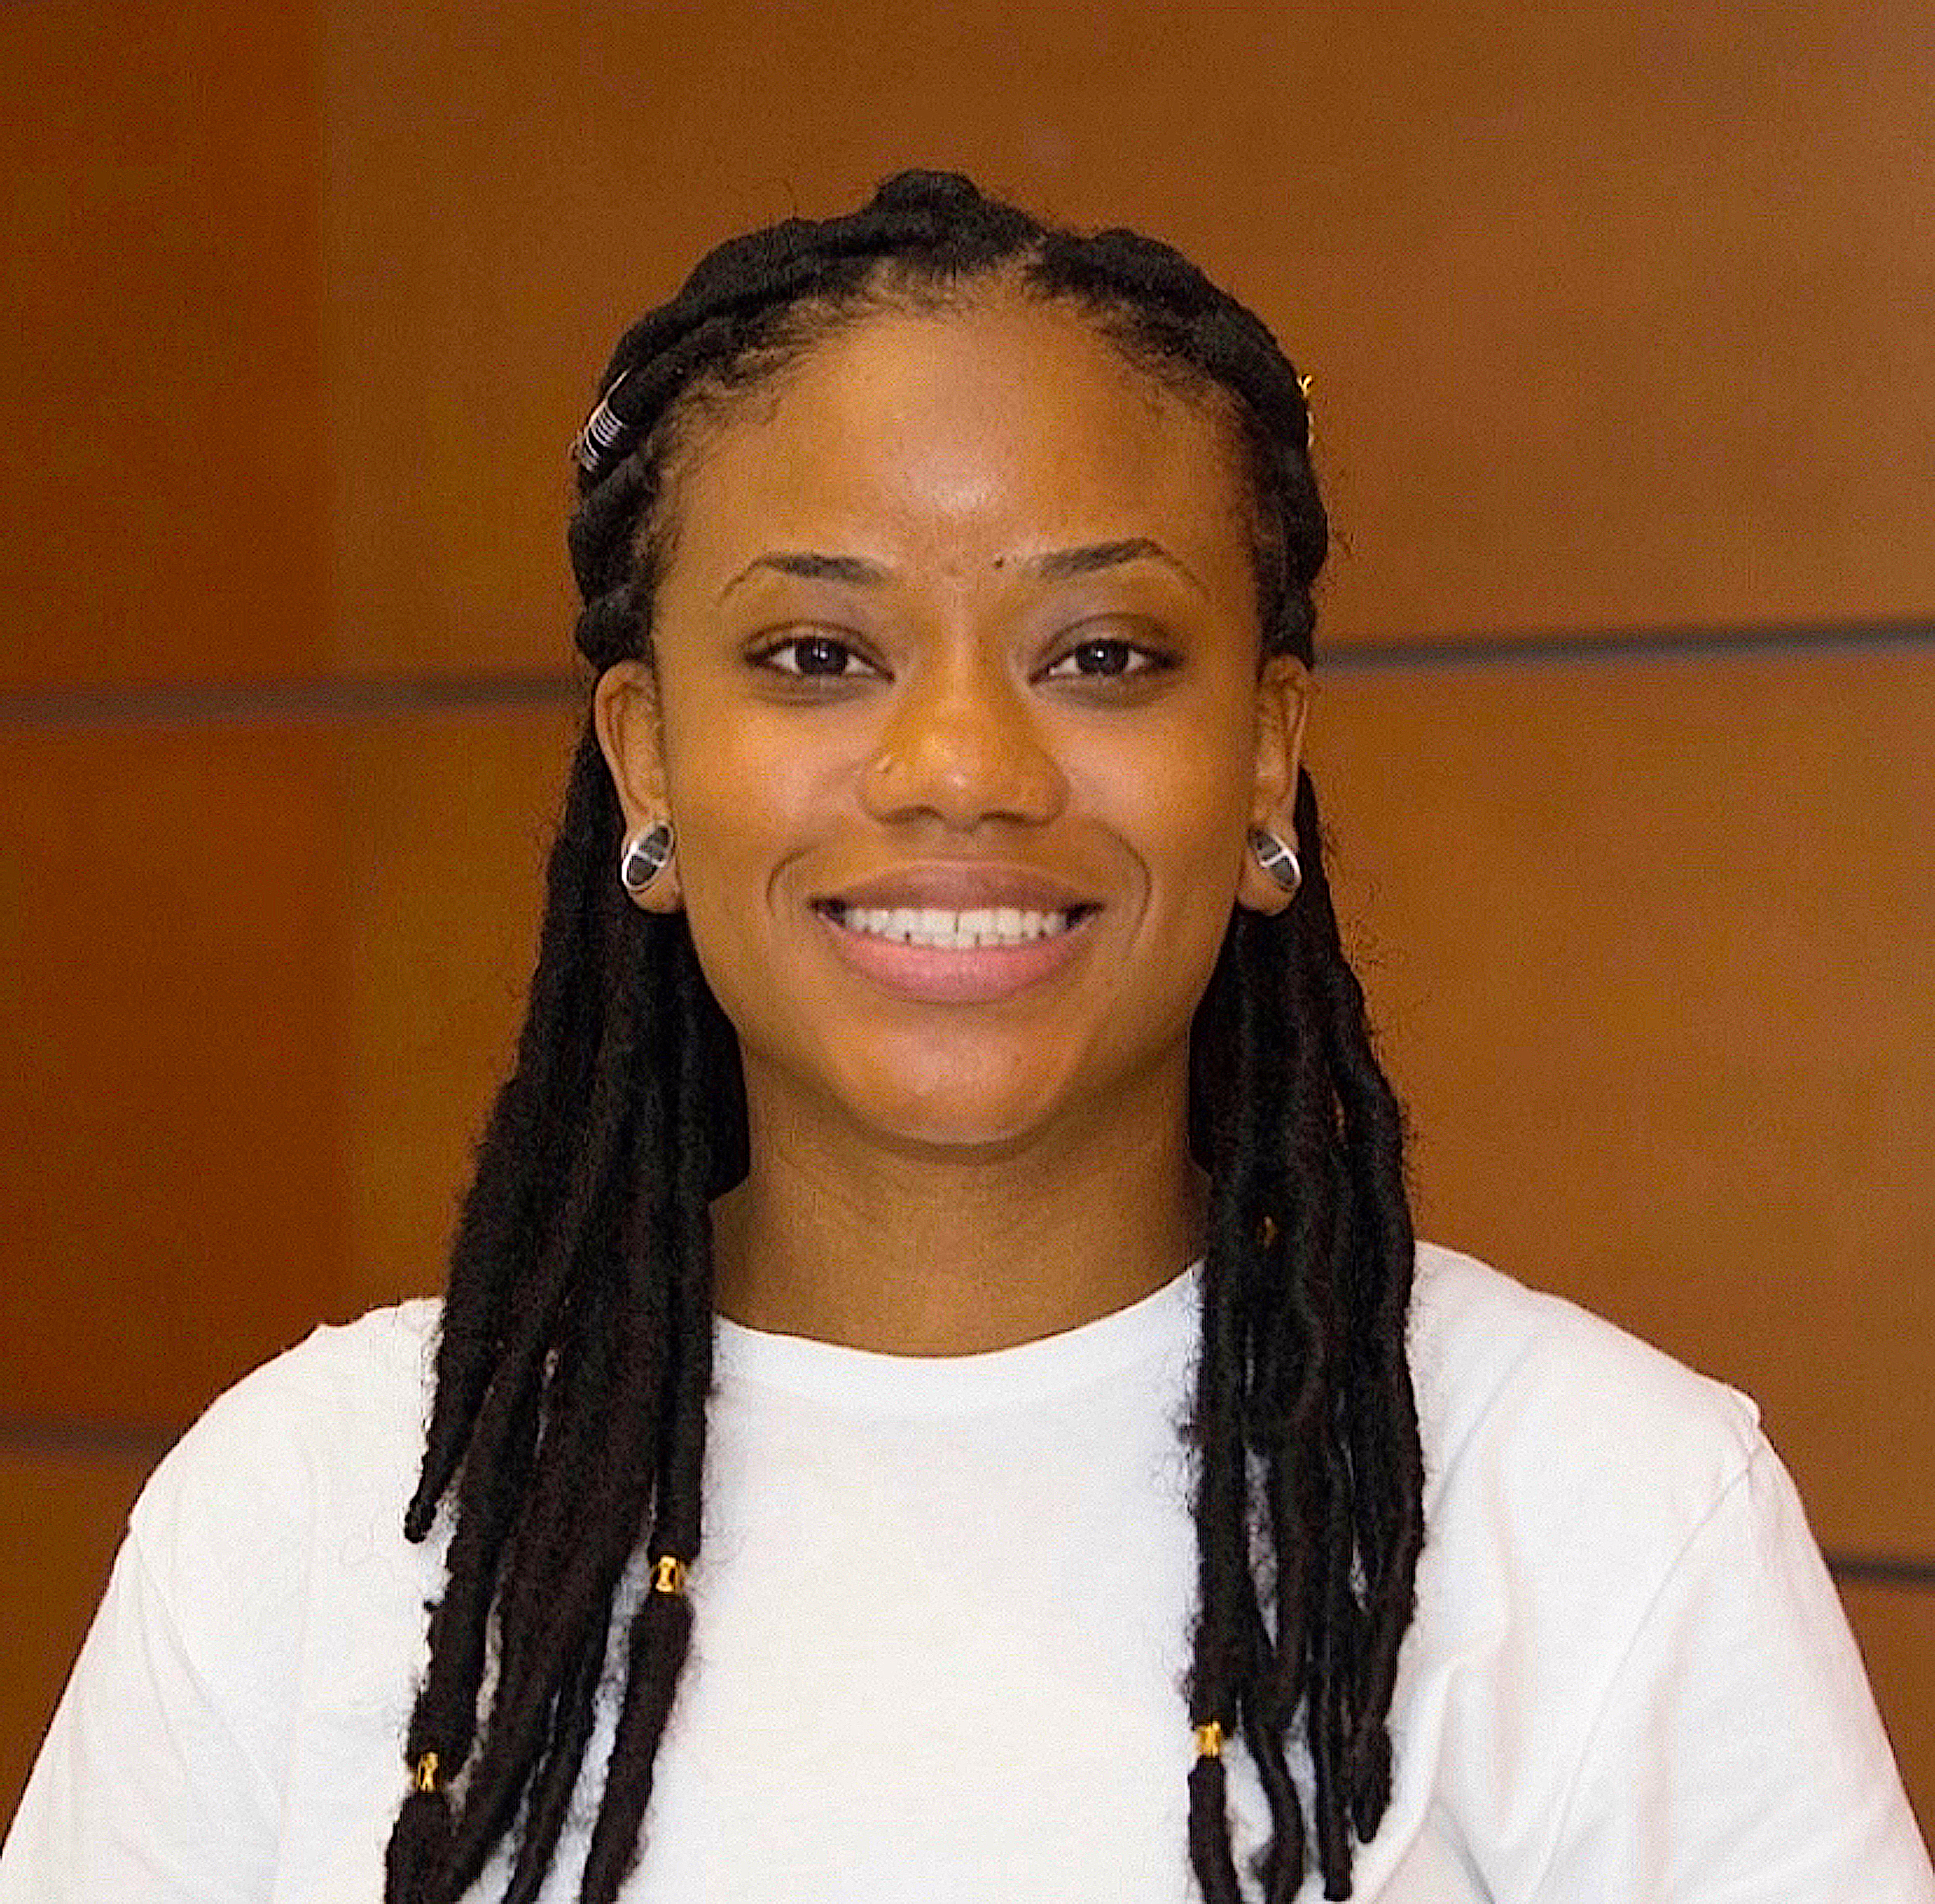 As a professor and researcher at Howard University, Michele Dovil continues to break barriers as an Afro-Latina social scientist.